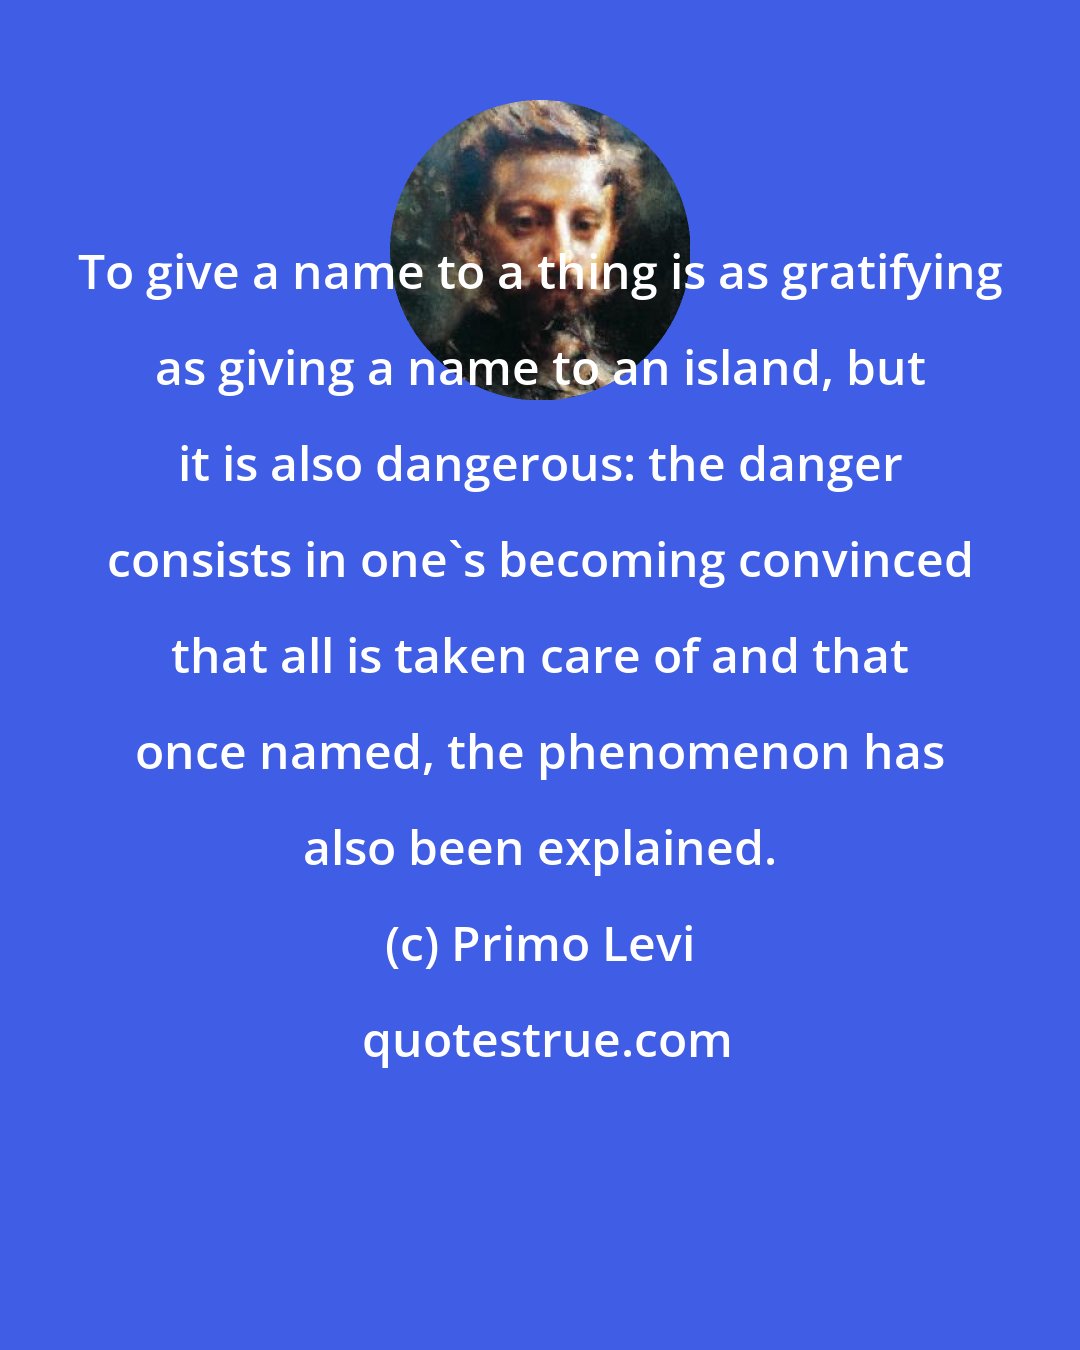 Primo Levi: To give a name to a thing is as gratifying as giving a name to an island, but it is also dangerous: the danger consists in one's becoming convinced that all is taken care of and that once named, the phenomenon has also been explained.